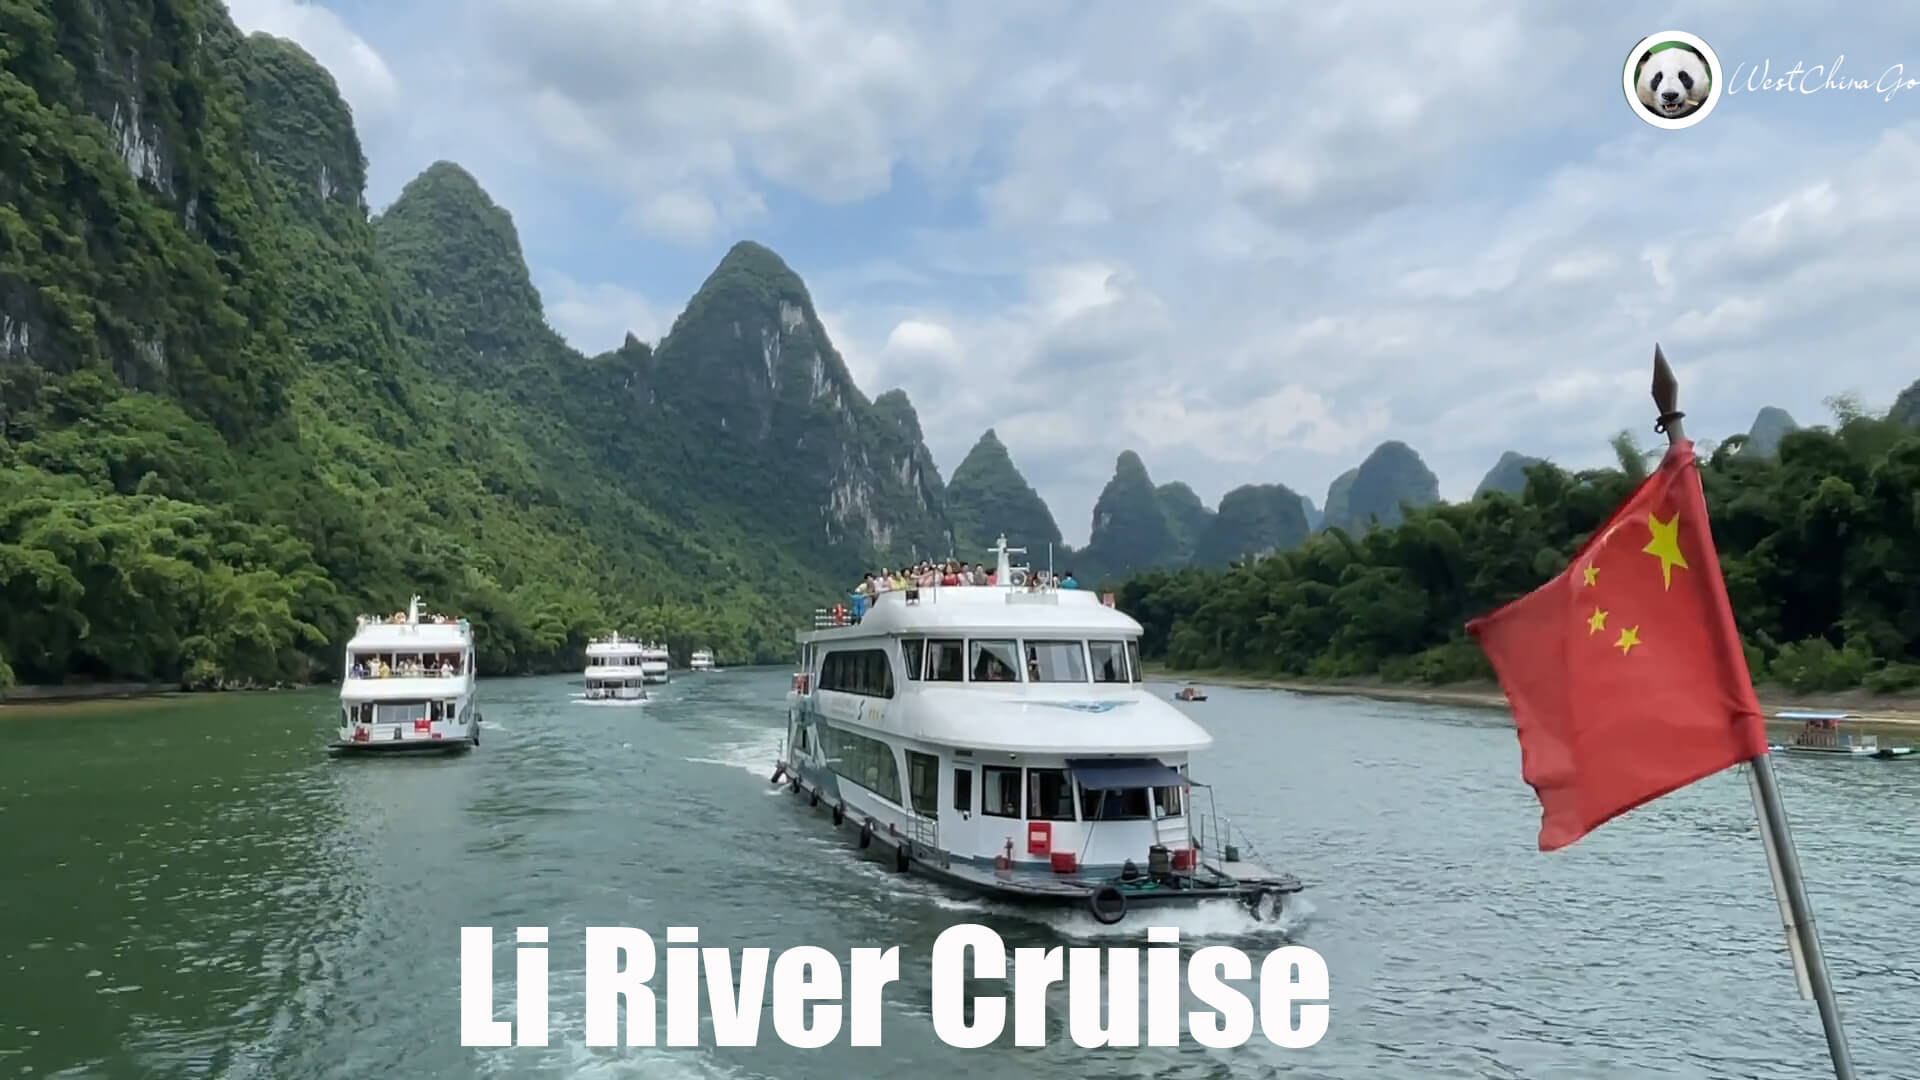 From Guilin to Yangshuo by Li River Cruise